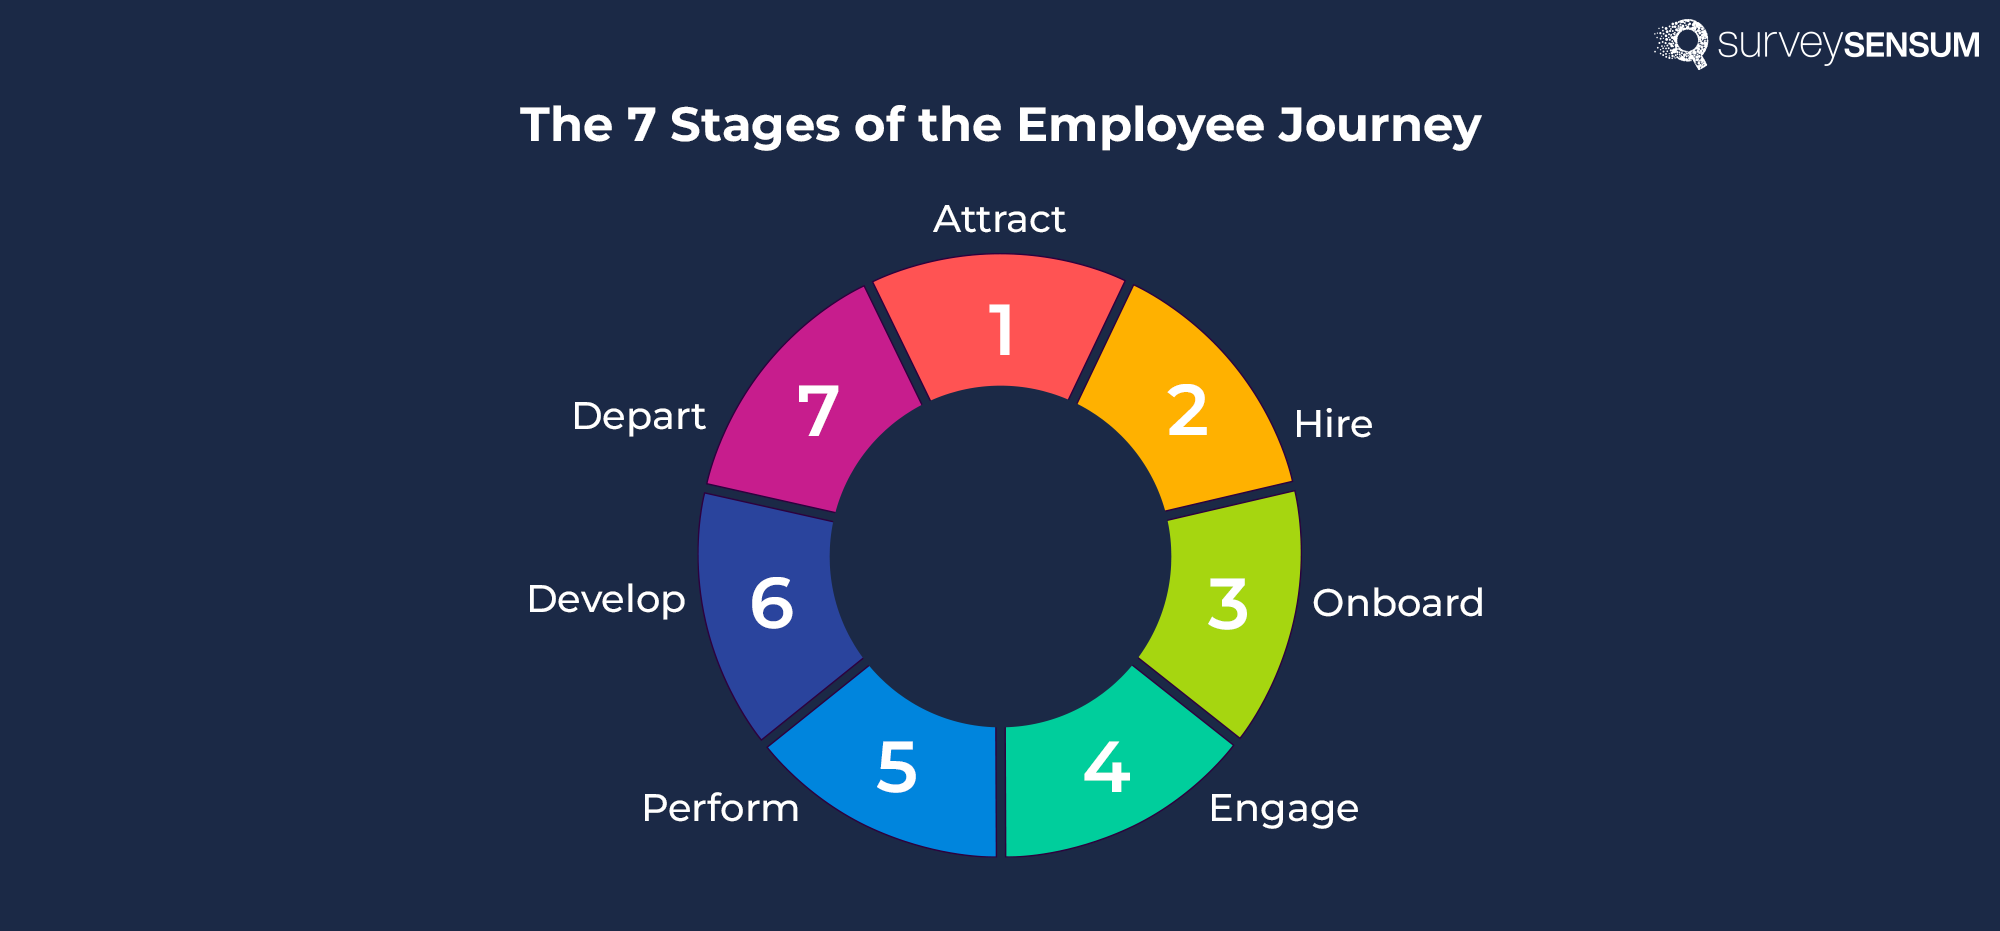 The image depicts each stage of an employee’s journey - attract, hire, engage, perform, develop, and depart. 